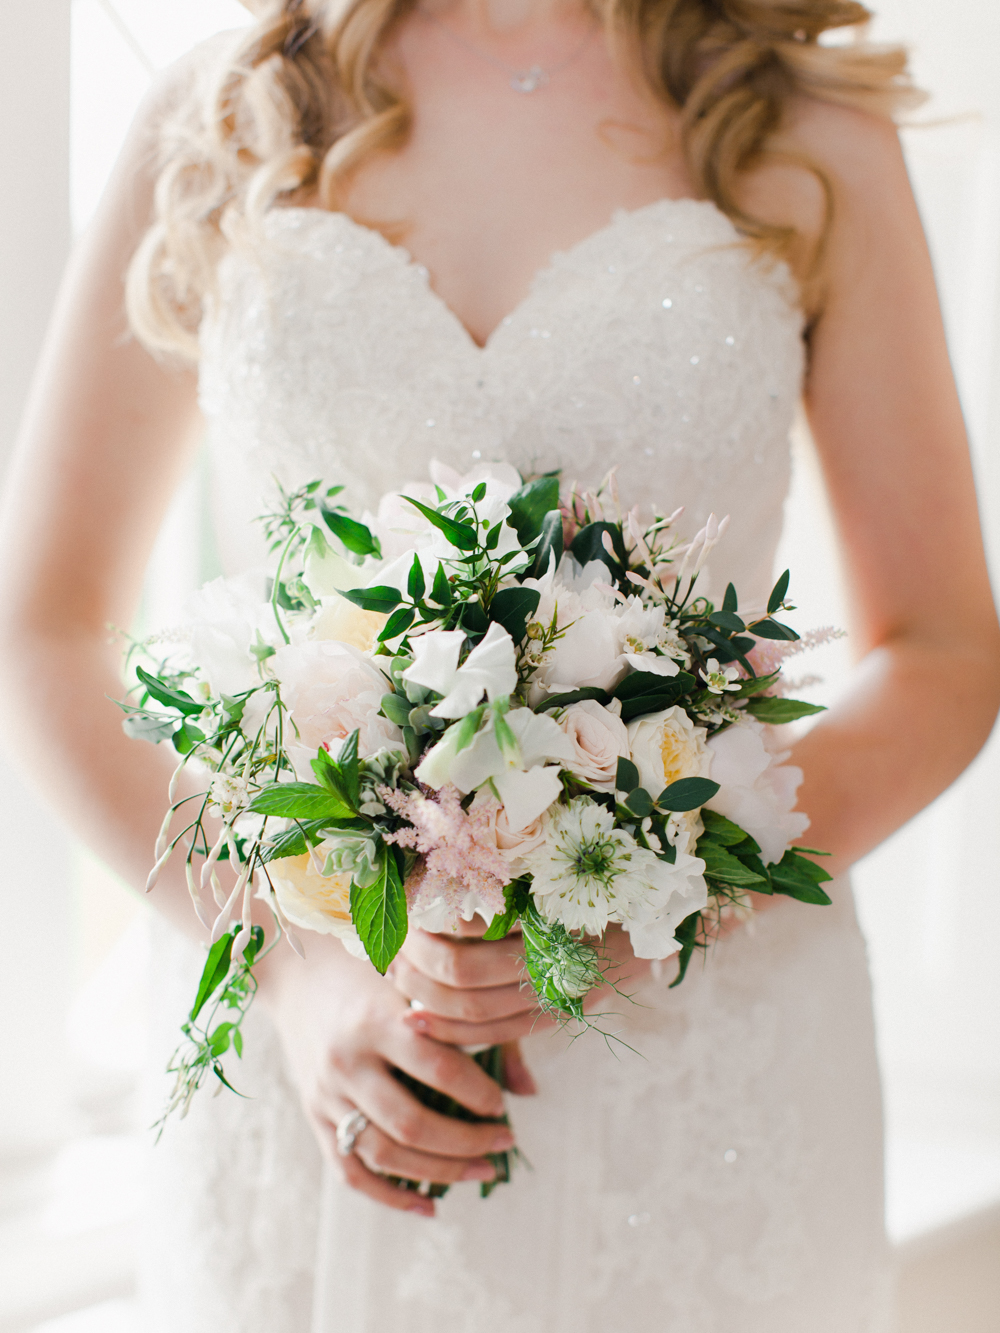 Bride holding a bouquet of blush peonies against her lace wedding dress